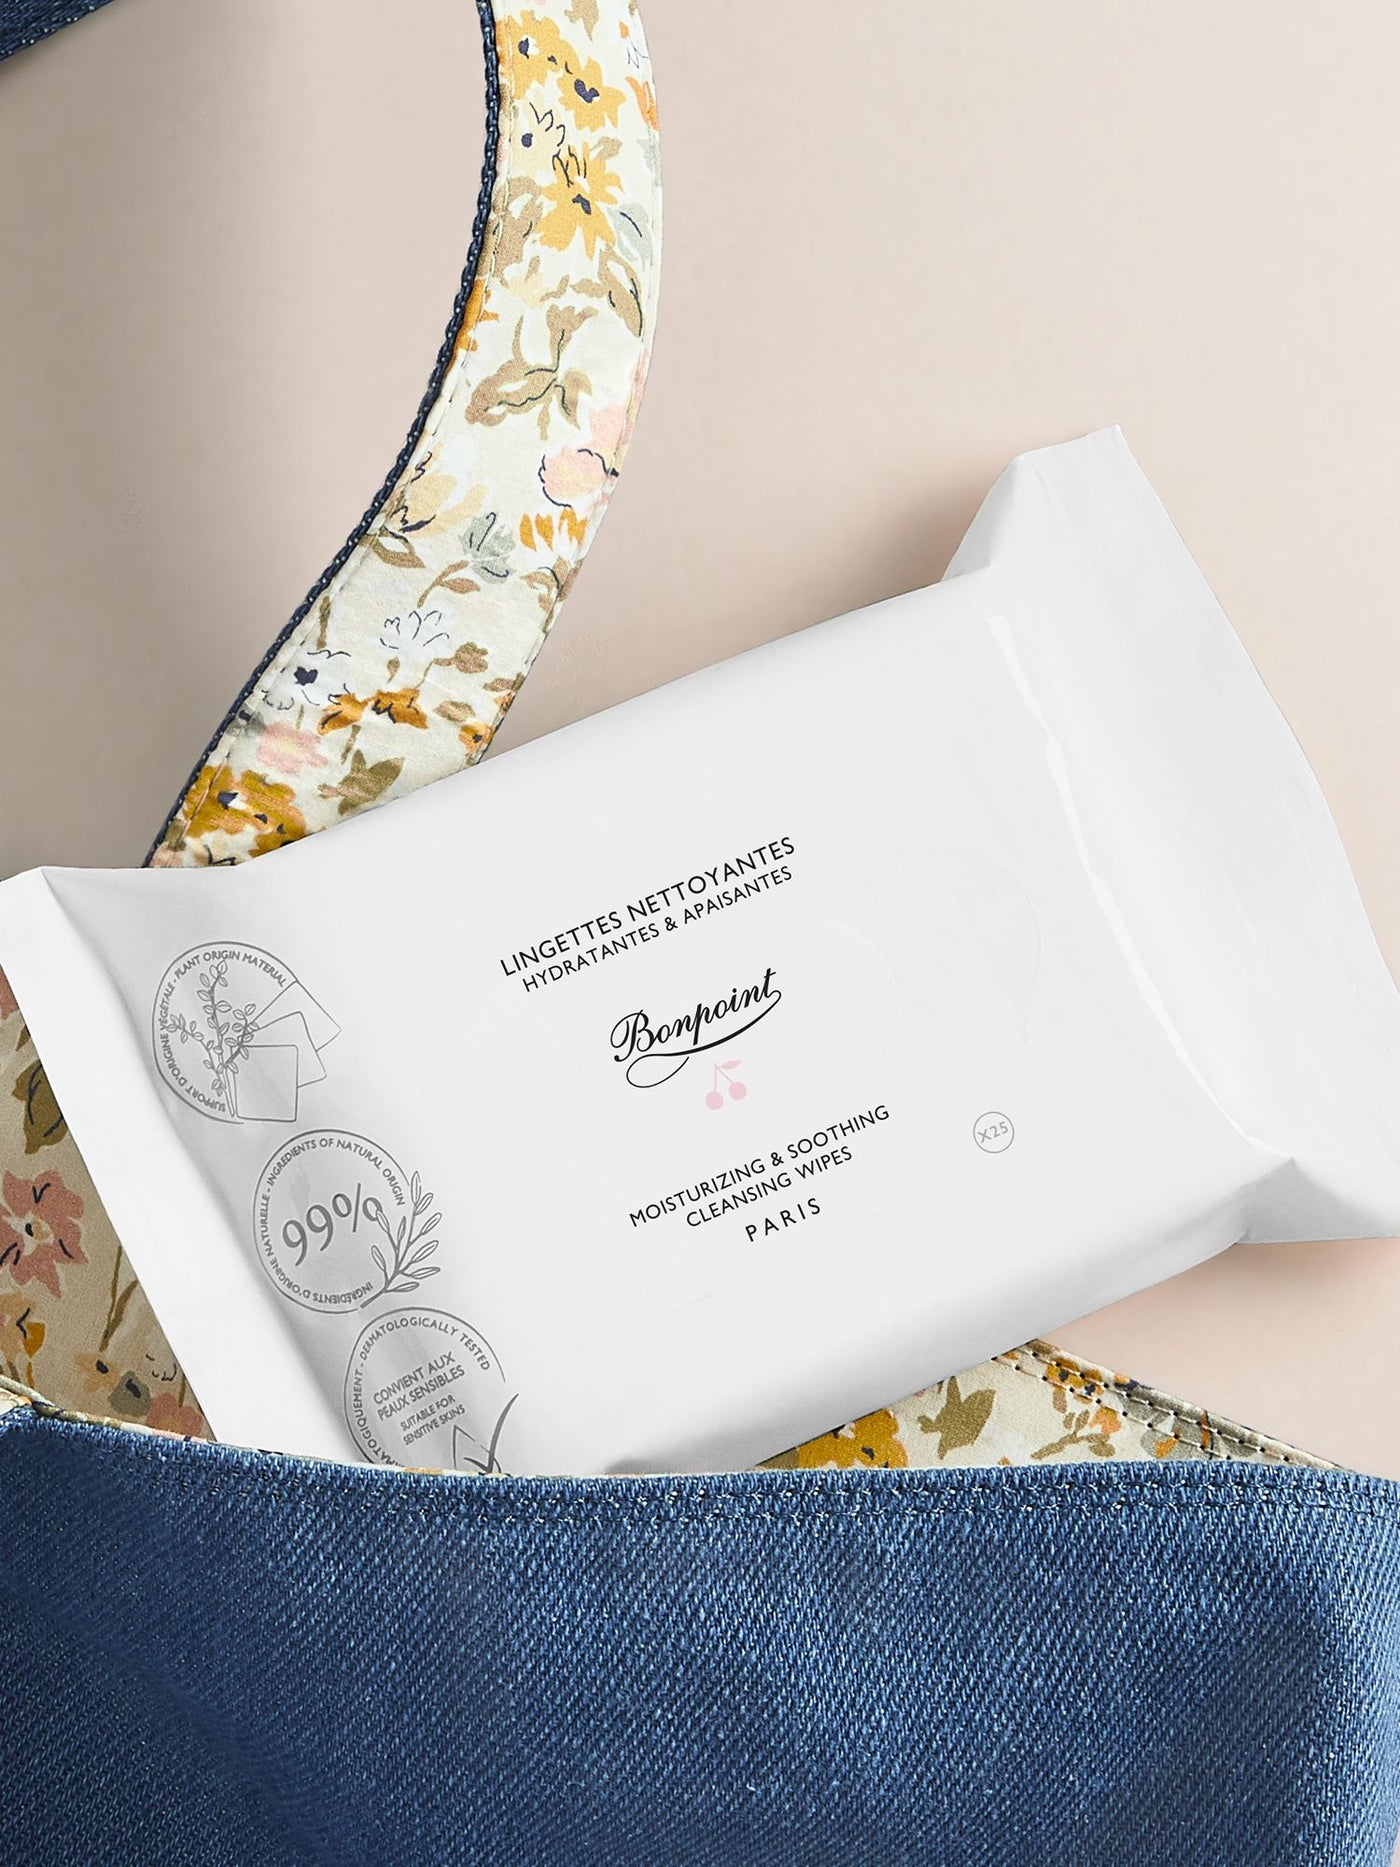 Cleansing wipes